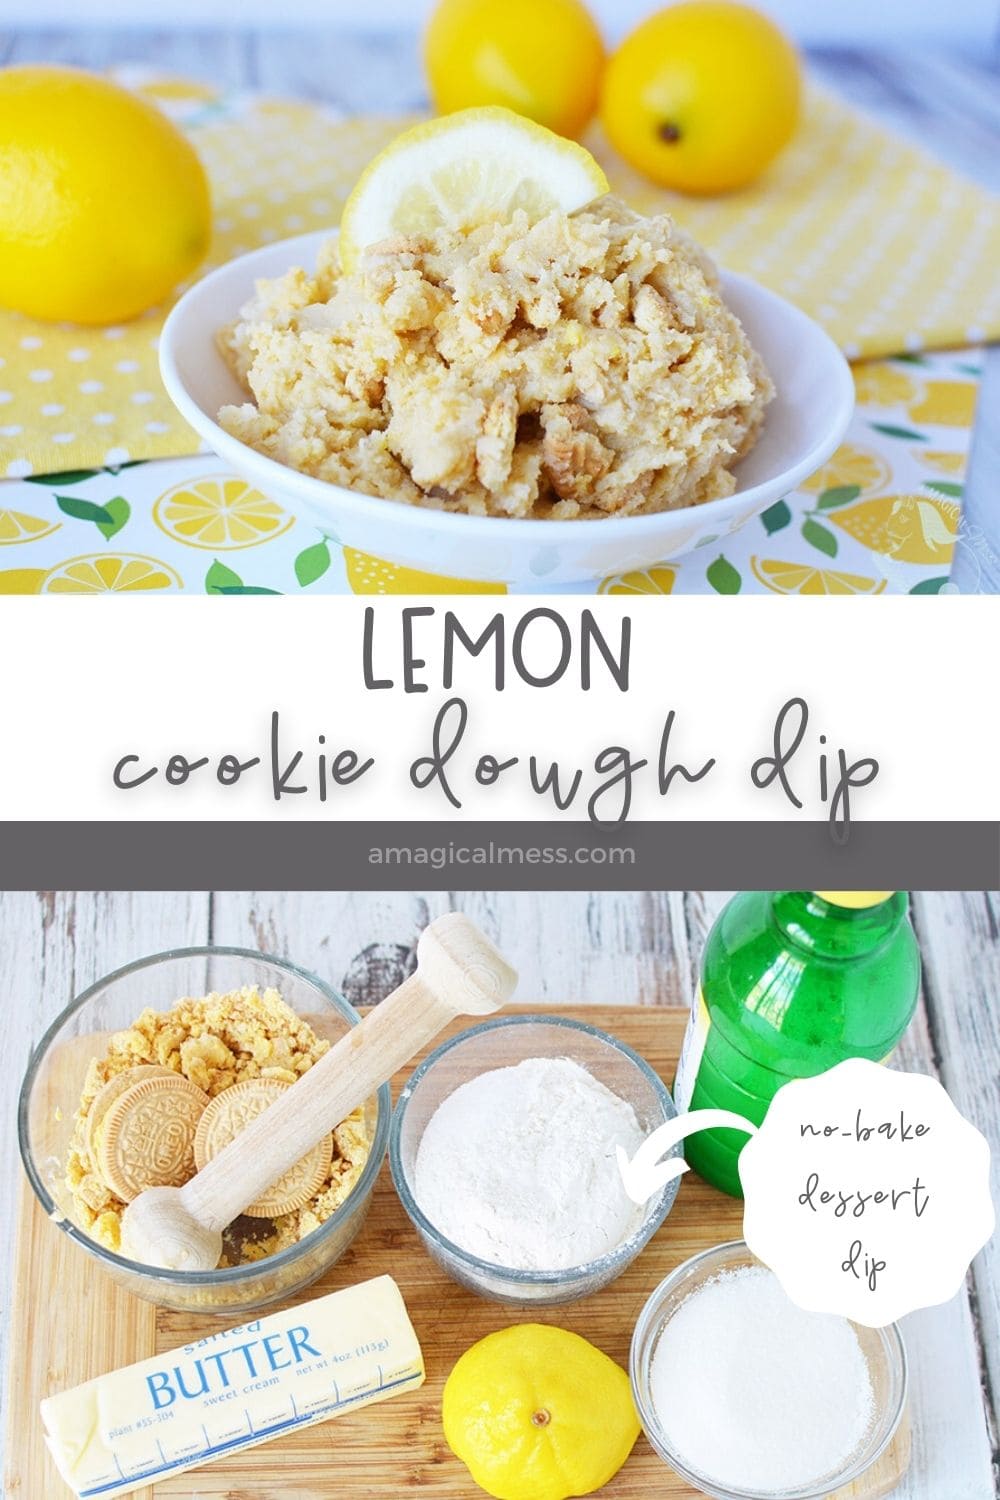 cookie dough in a bowl and lemony ingredients